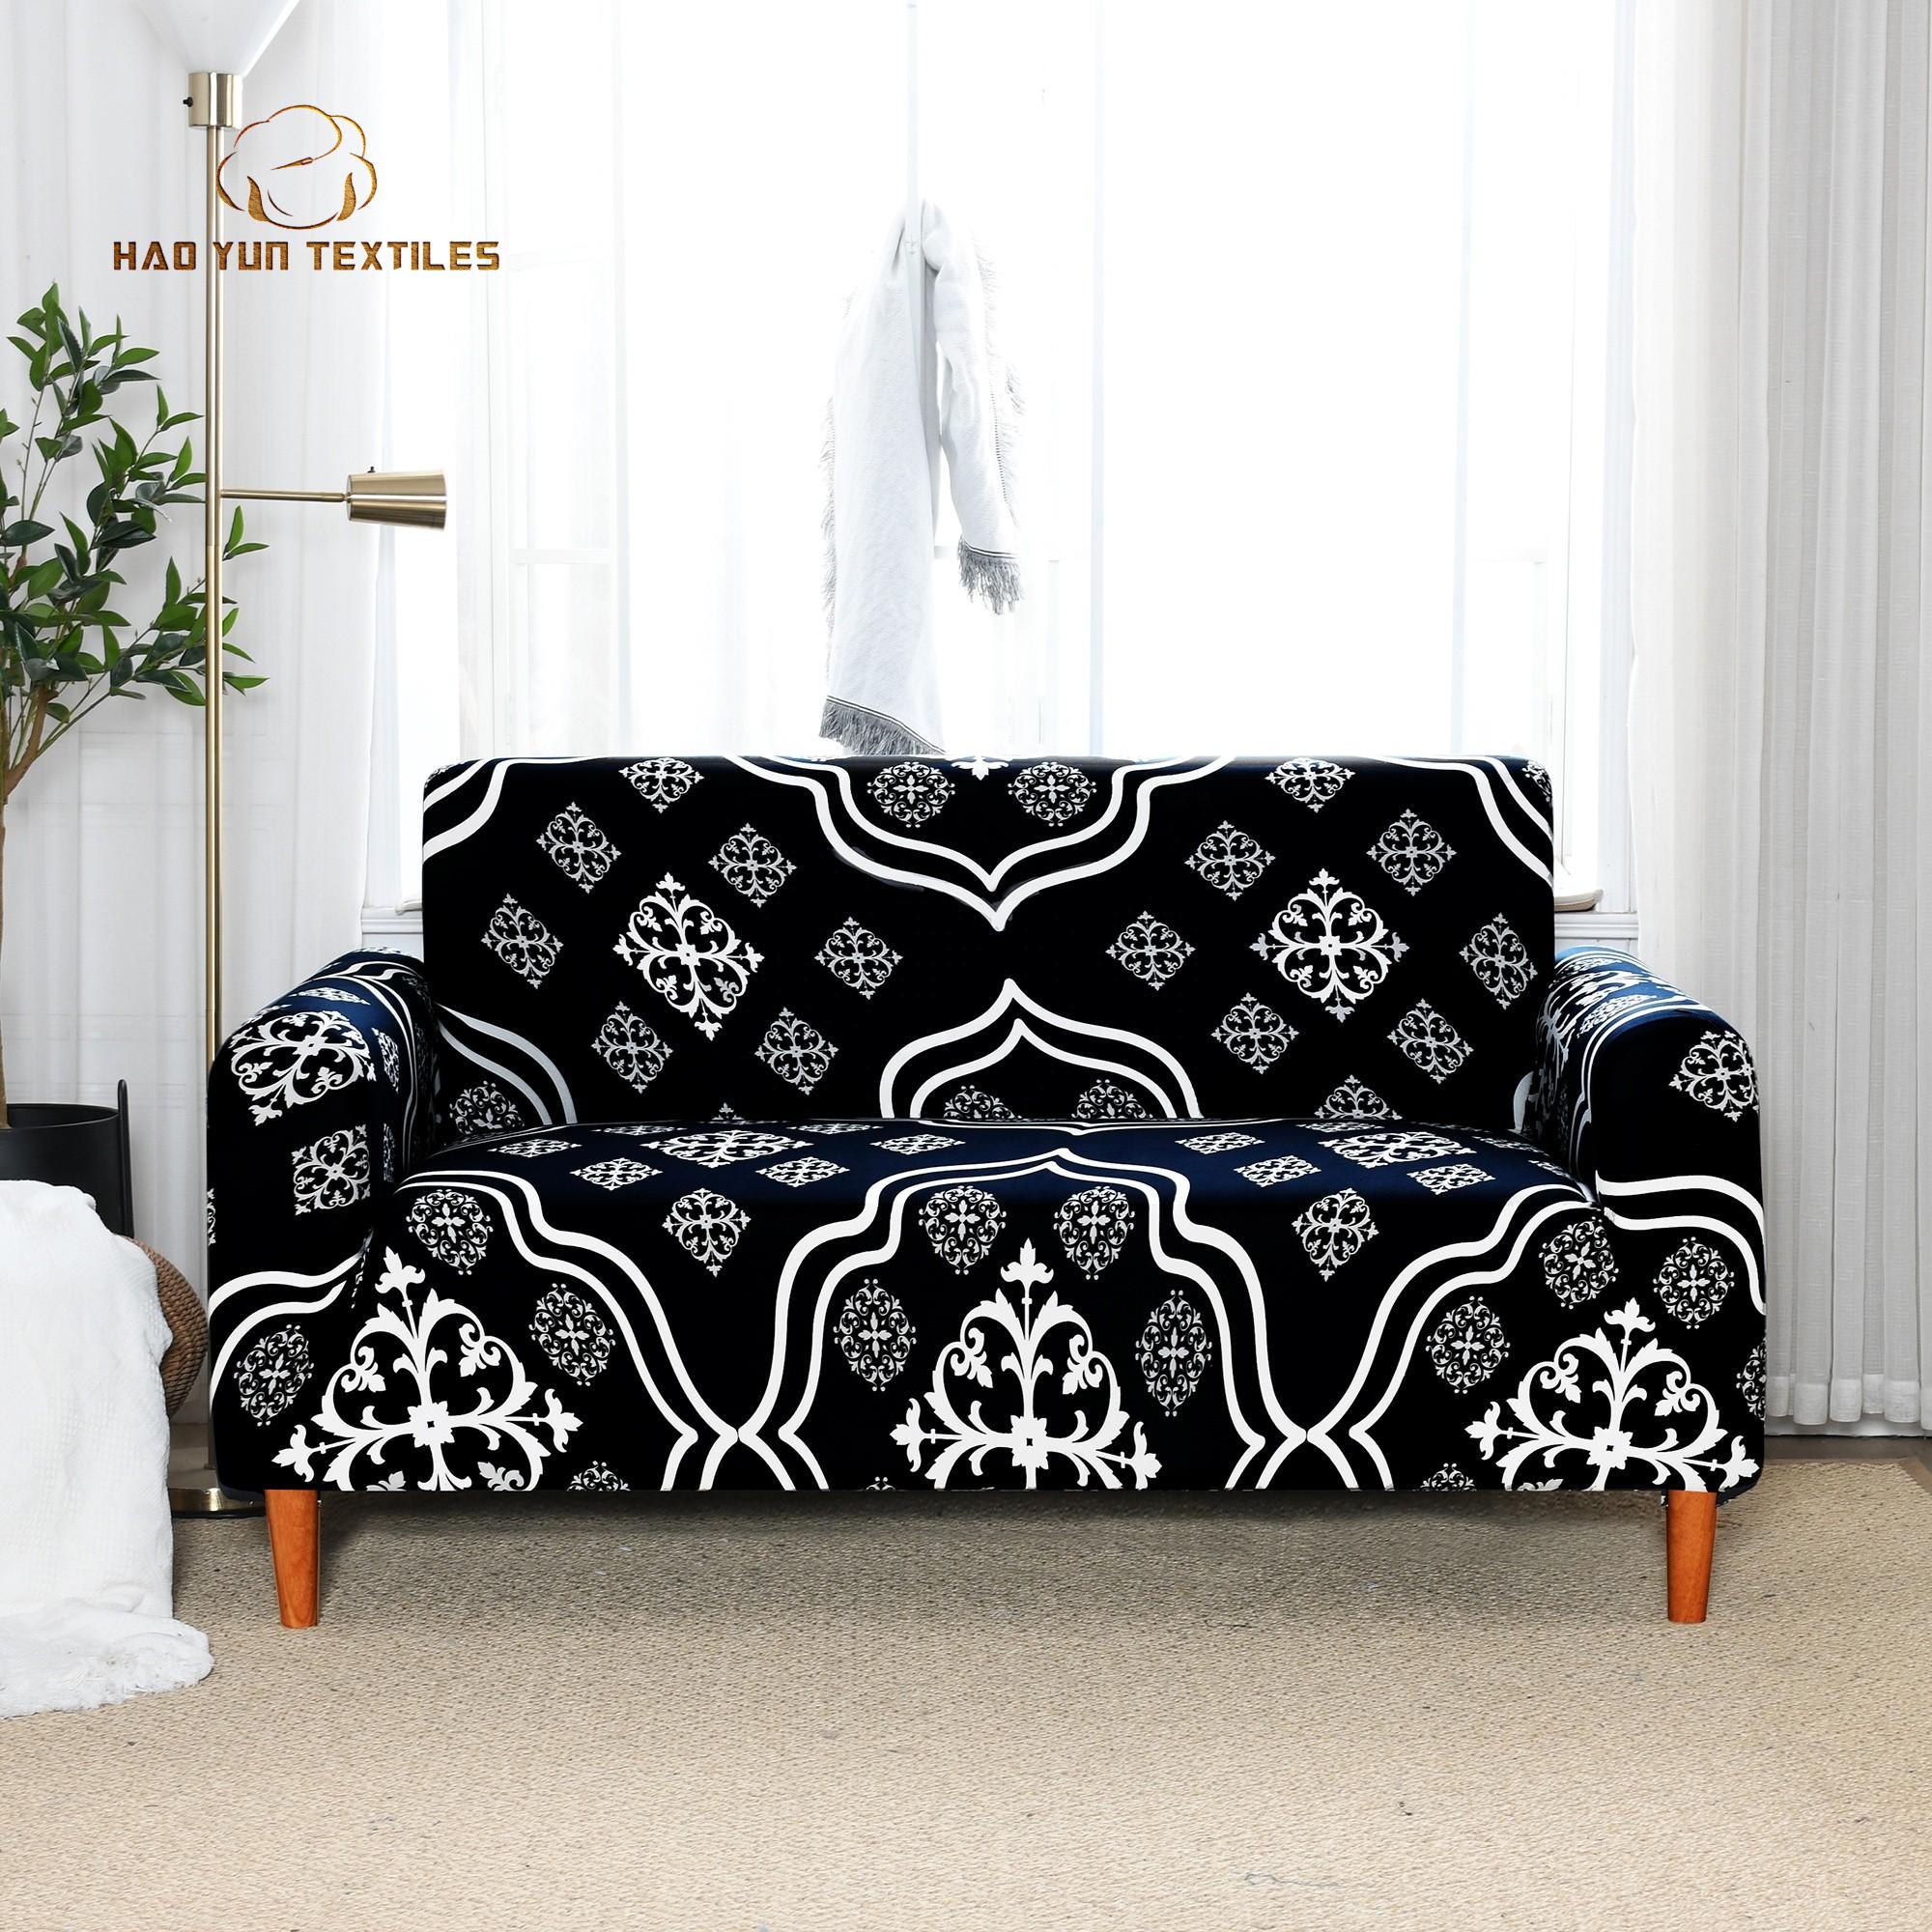 Customized Protector Waterproof Slipcover for Sofa Couch